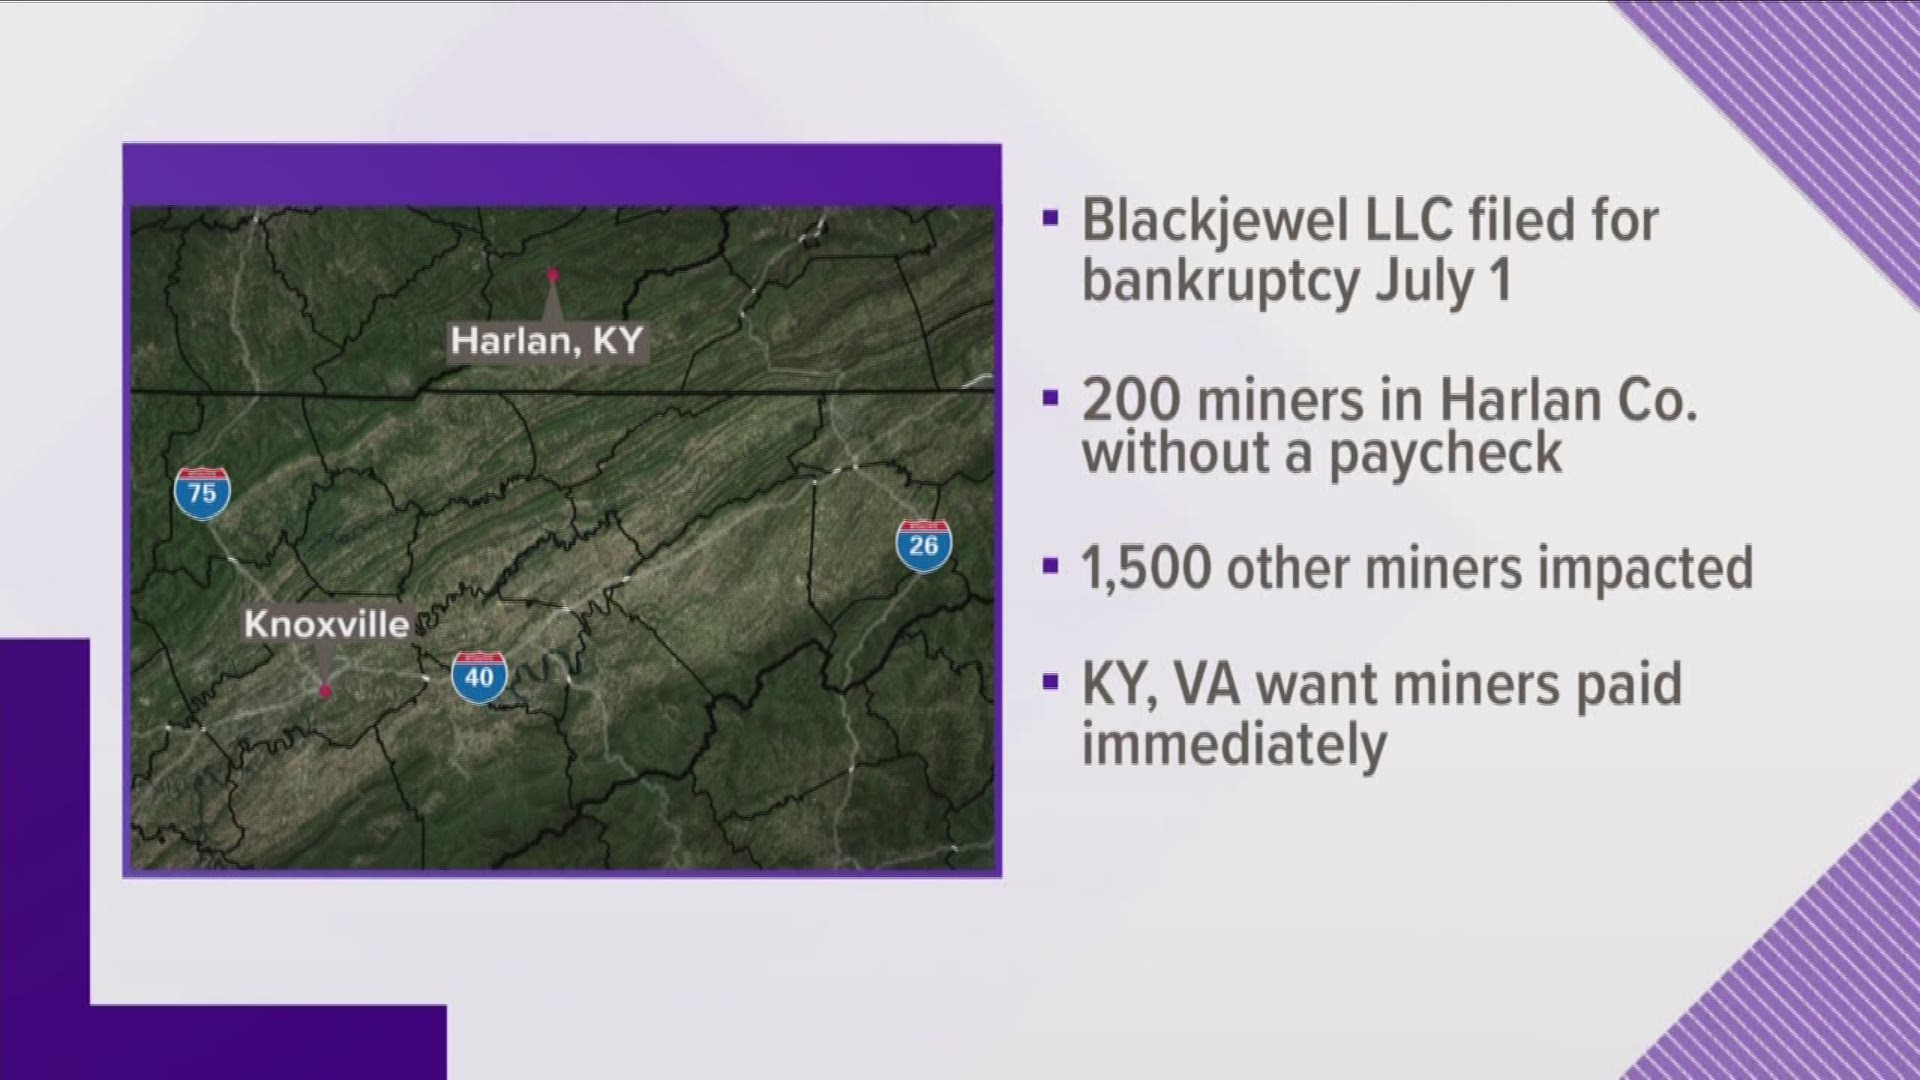 The attorneys general for Kentucky and Virginia now say blackjewel failed to prepare for bankruptcy. They want the federal government to make sure those miners are paid immediately.